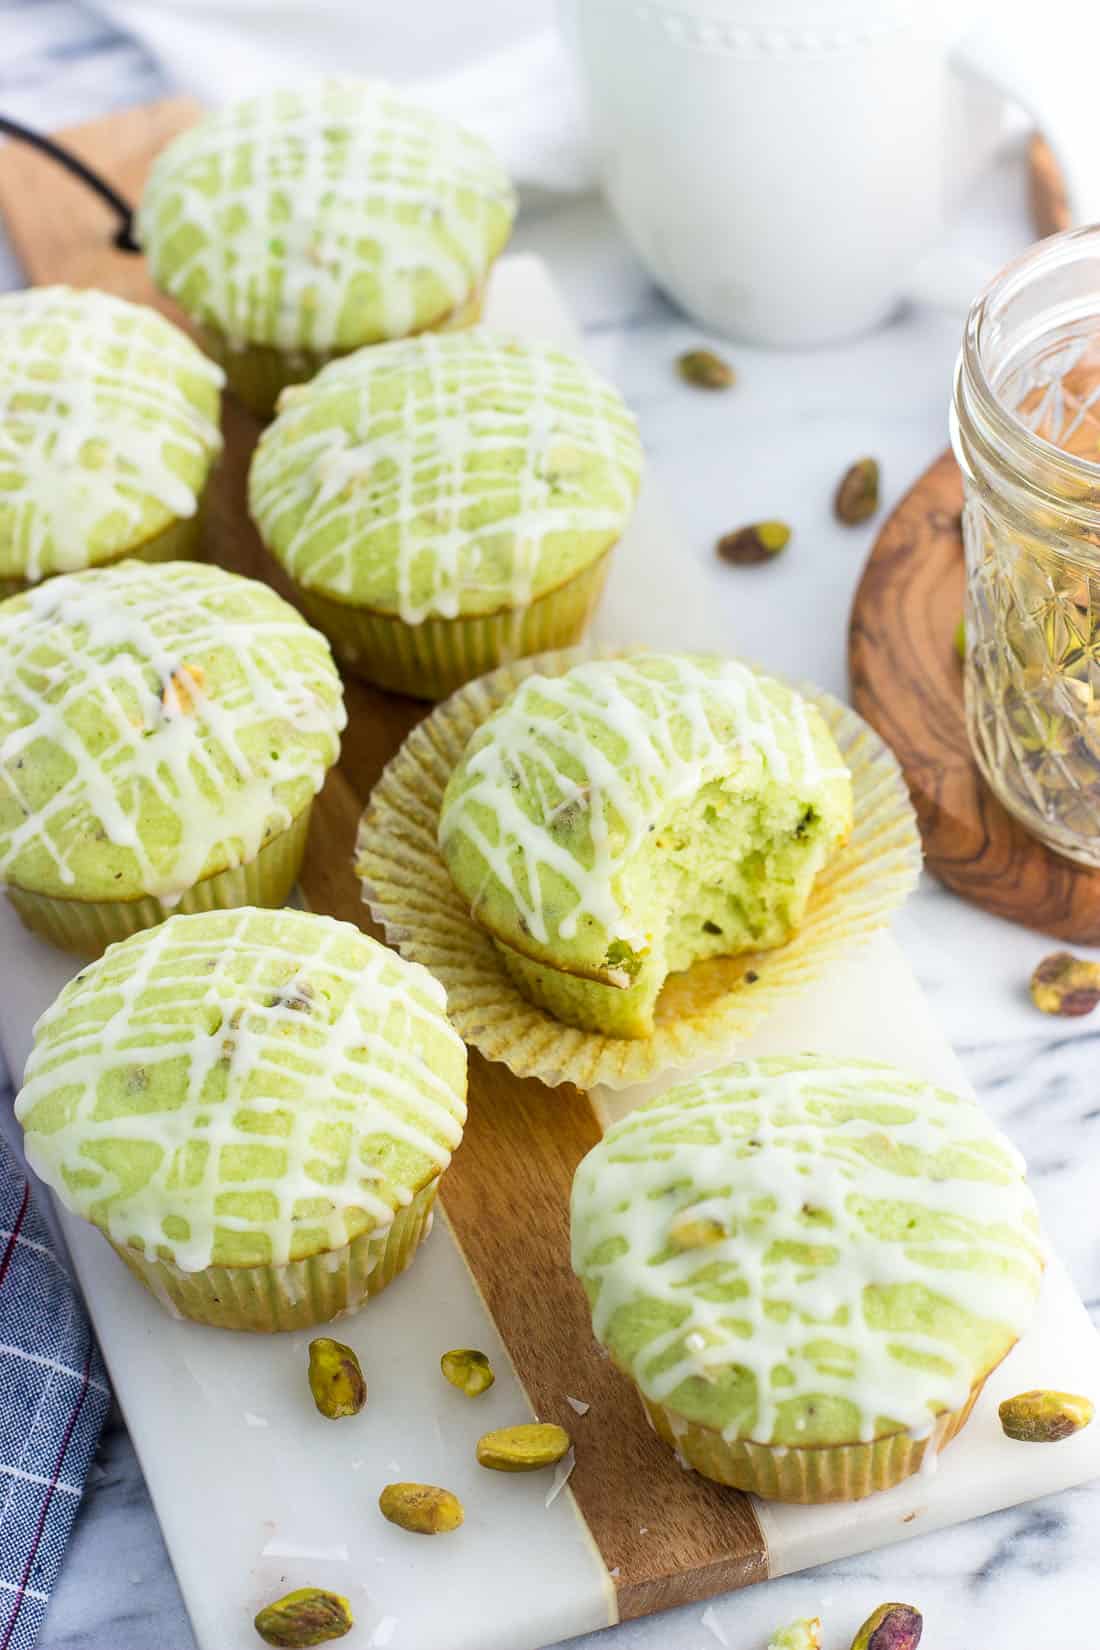 Pistachio muffins on a marble serving board. One muffin has the paper peeled back with a bite taken out of it